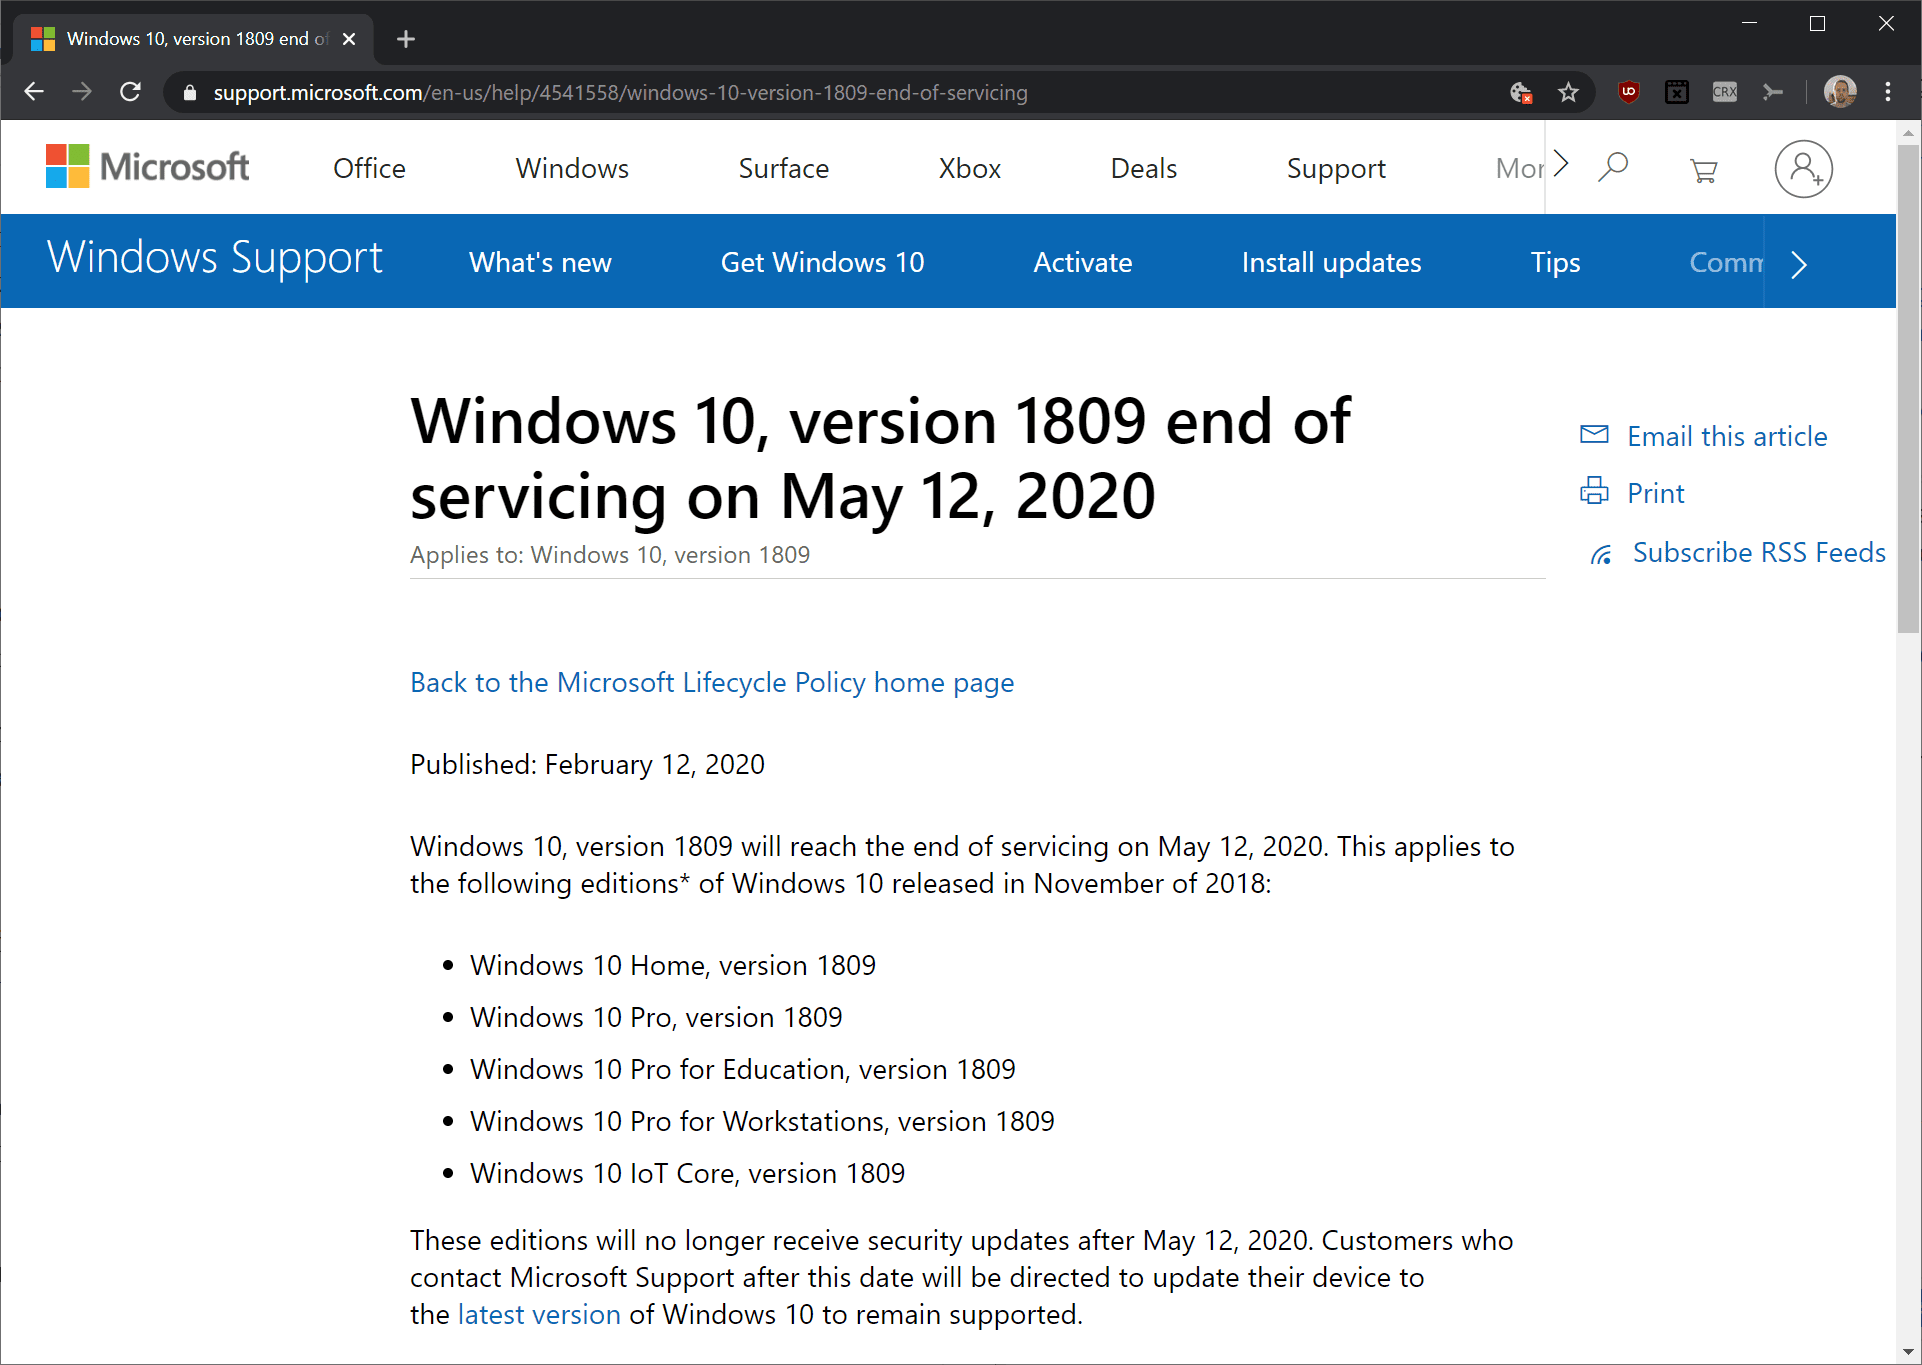 Windows 10 version 1809 will reach end of support in May 2020 windows-10-version-1809.png